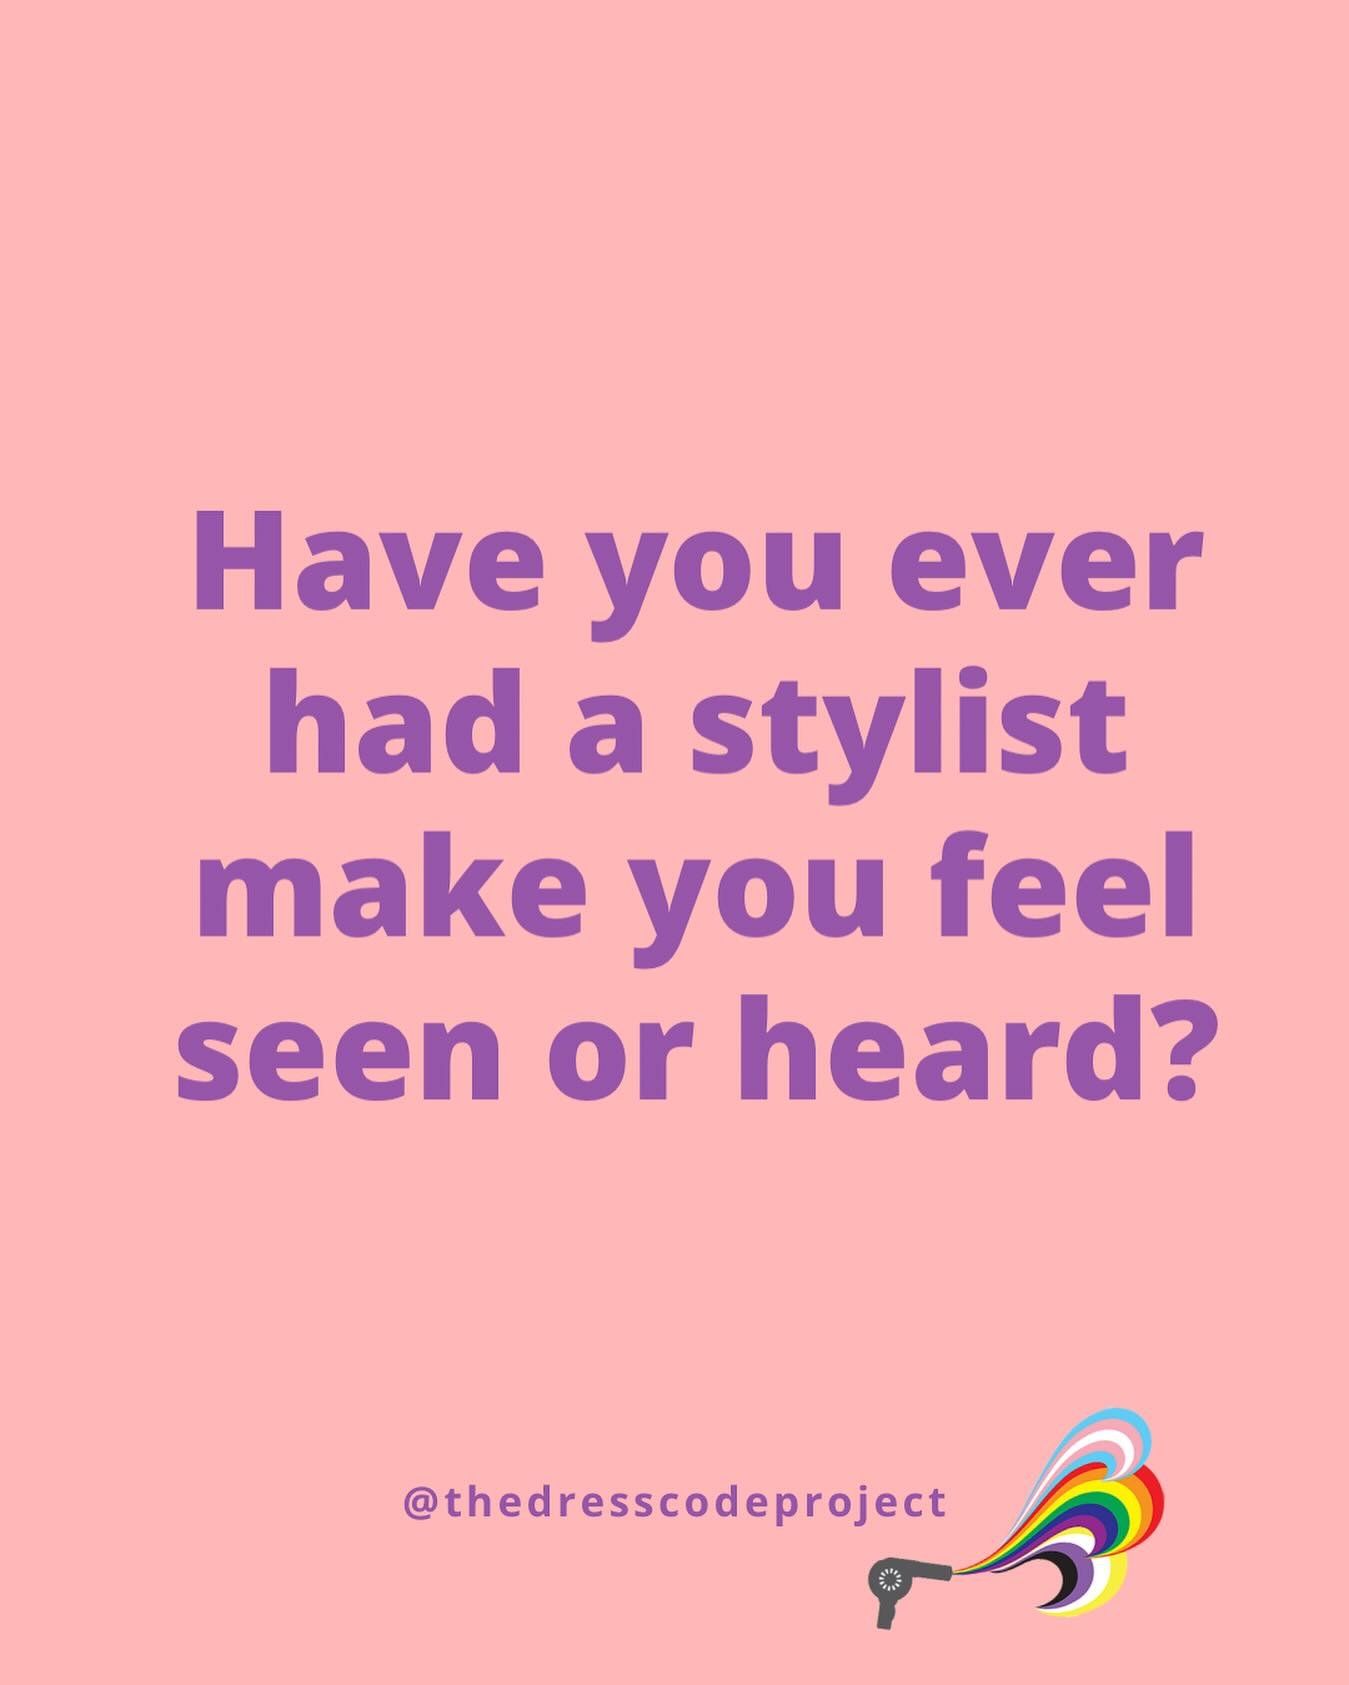 Share your experience!

#dresscodeproject #genderaffirminghaircare